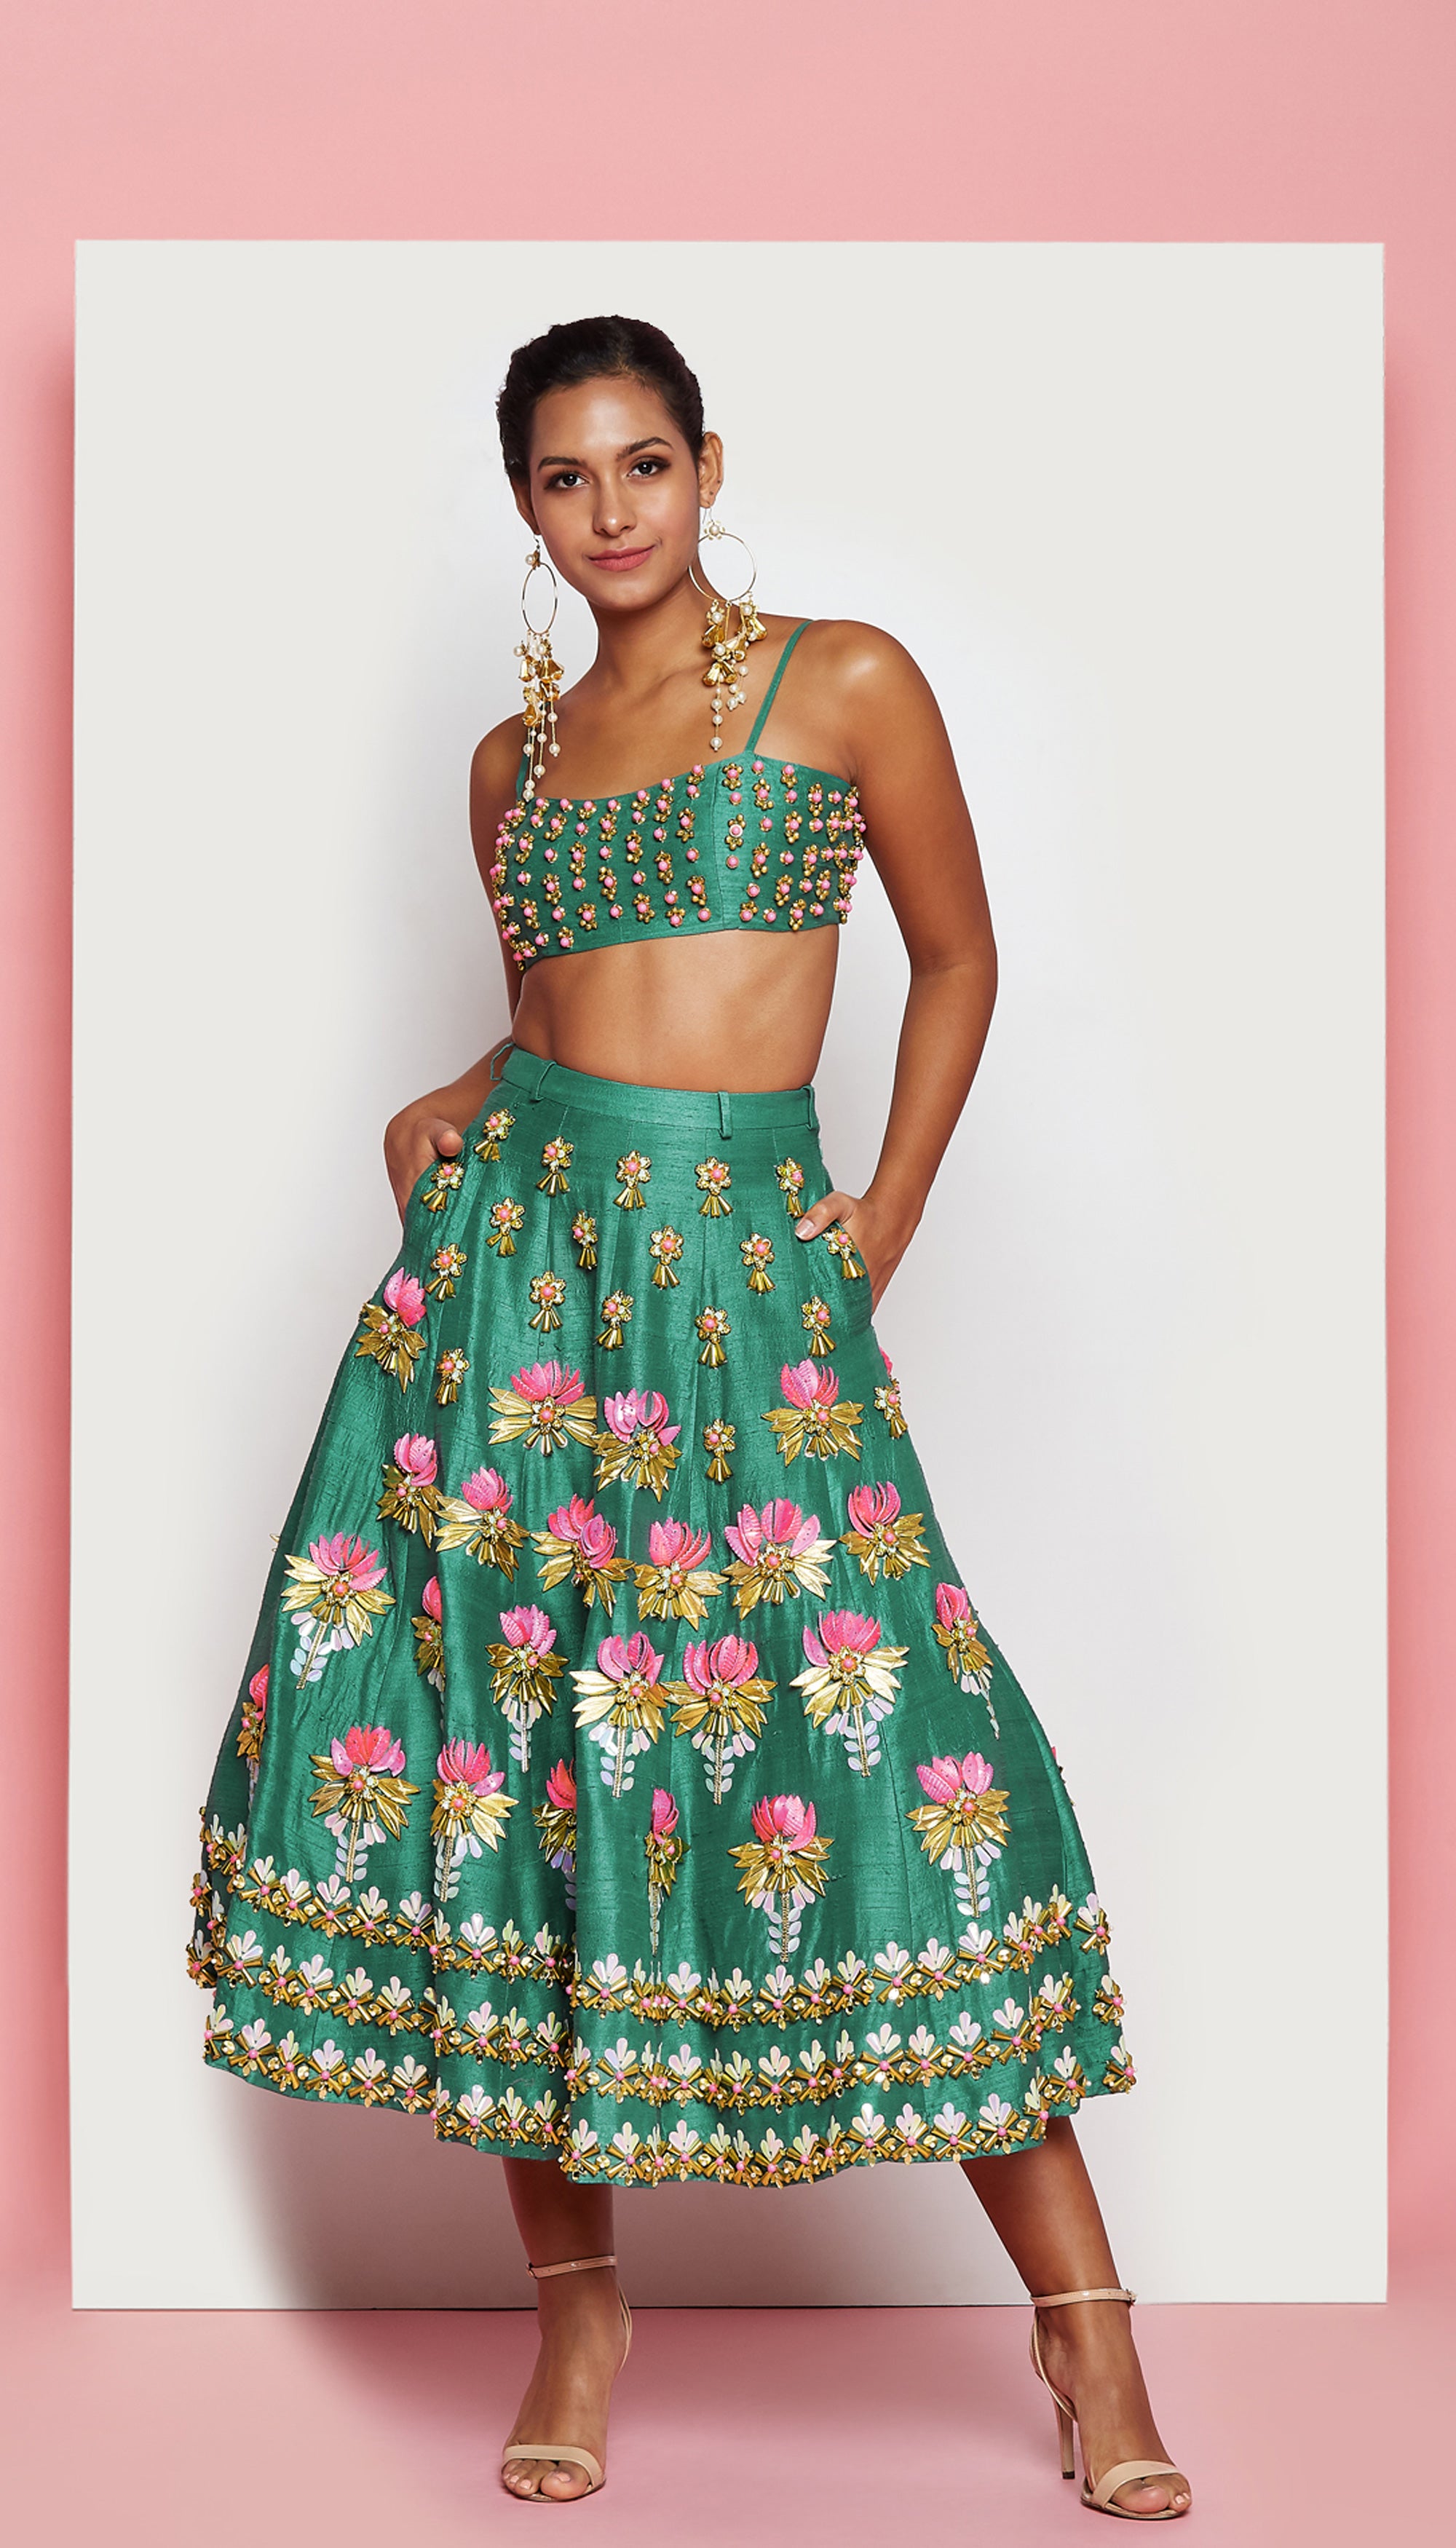 Crop Top Lehenga Trends That You Should Keep An Eye Out For